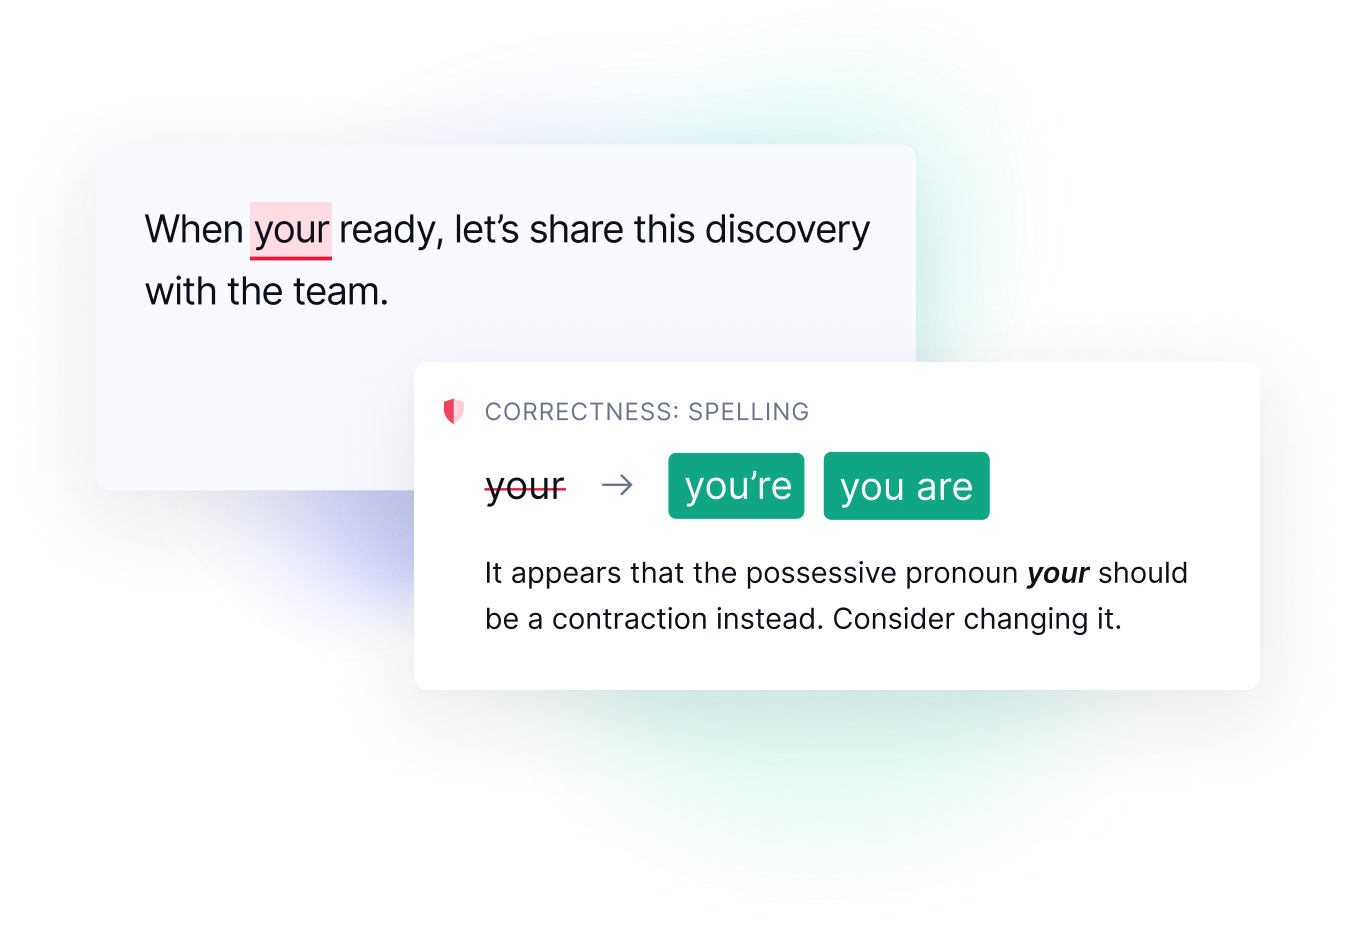 Spelling correction within the Grammarly product